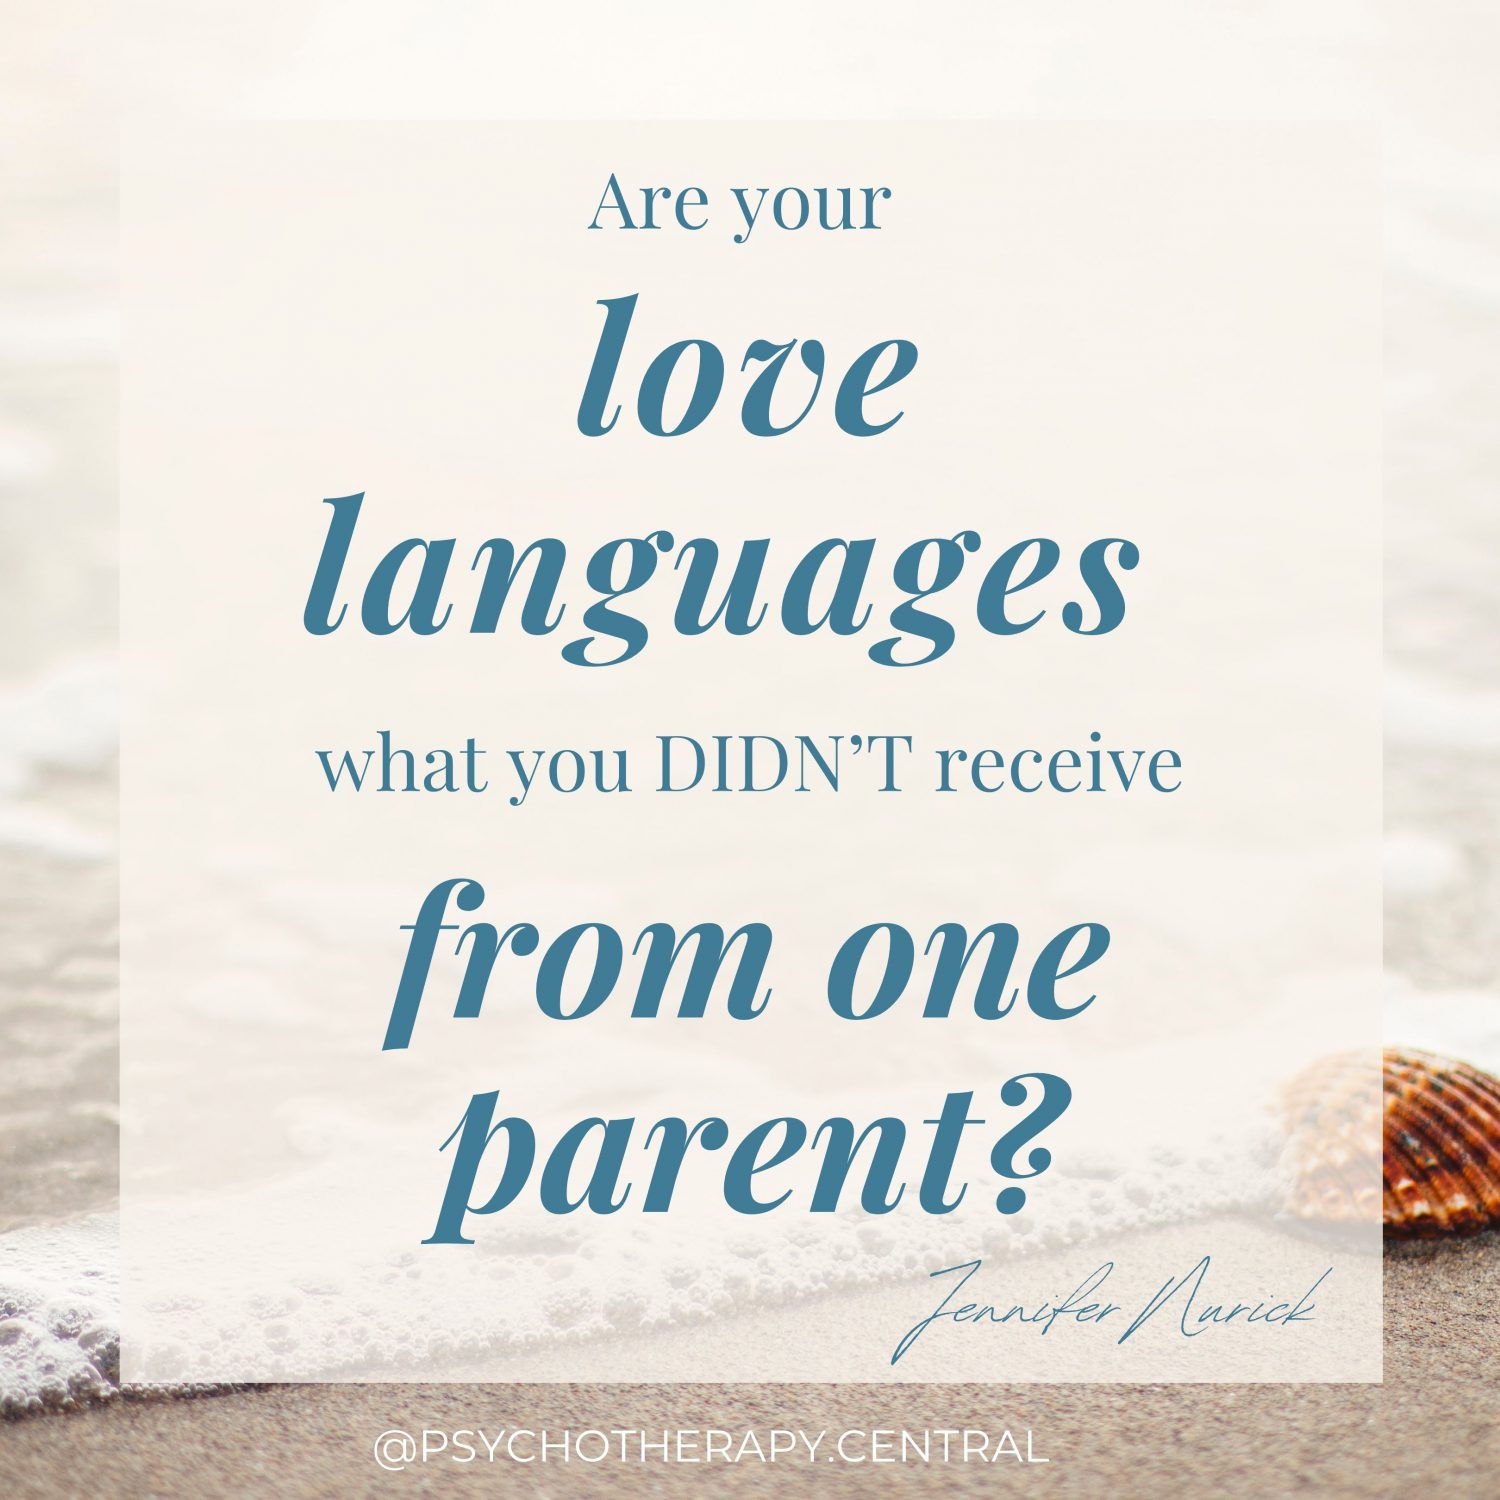 Are your love languages what you DIDN’T receive from one parent